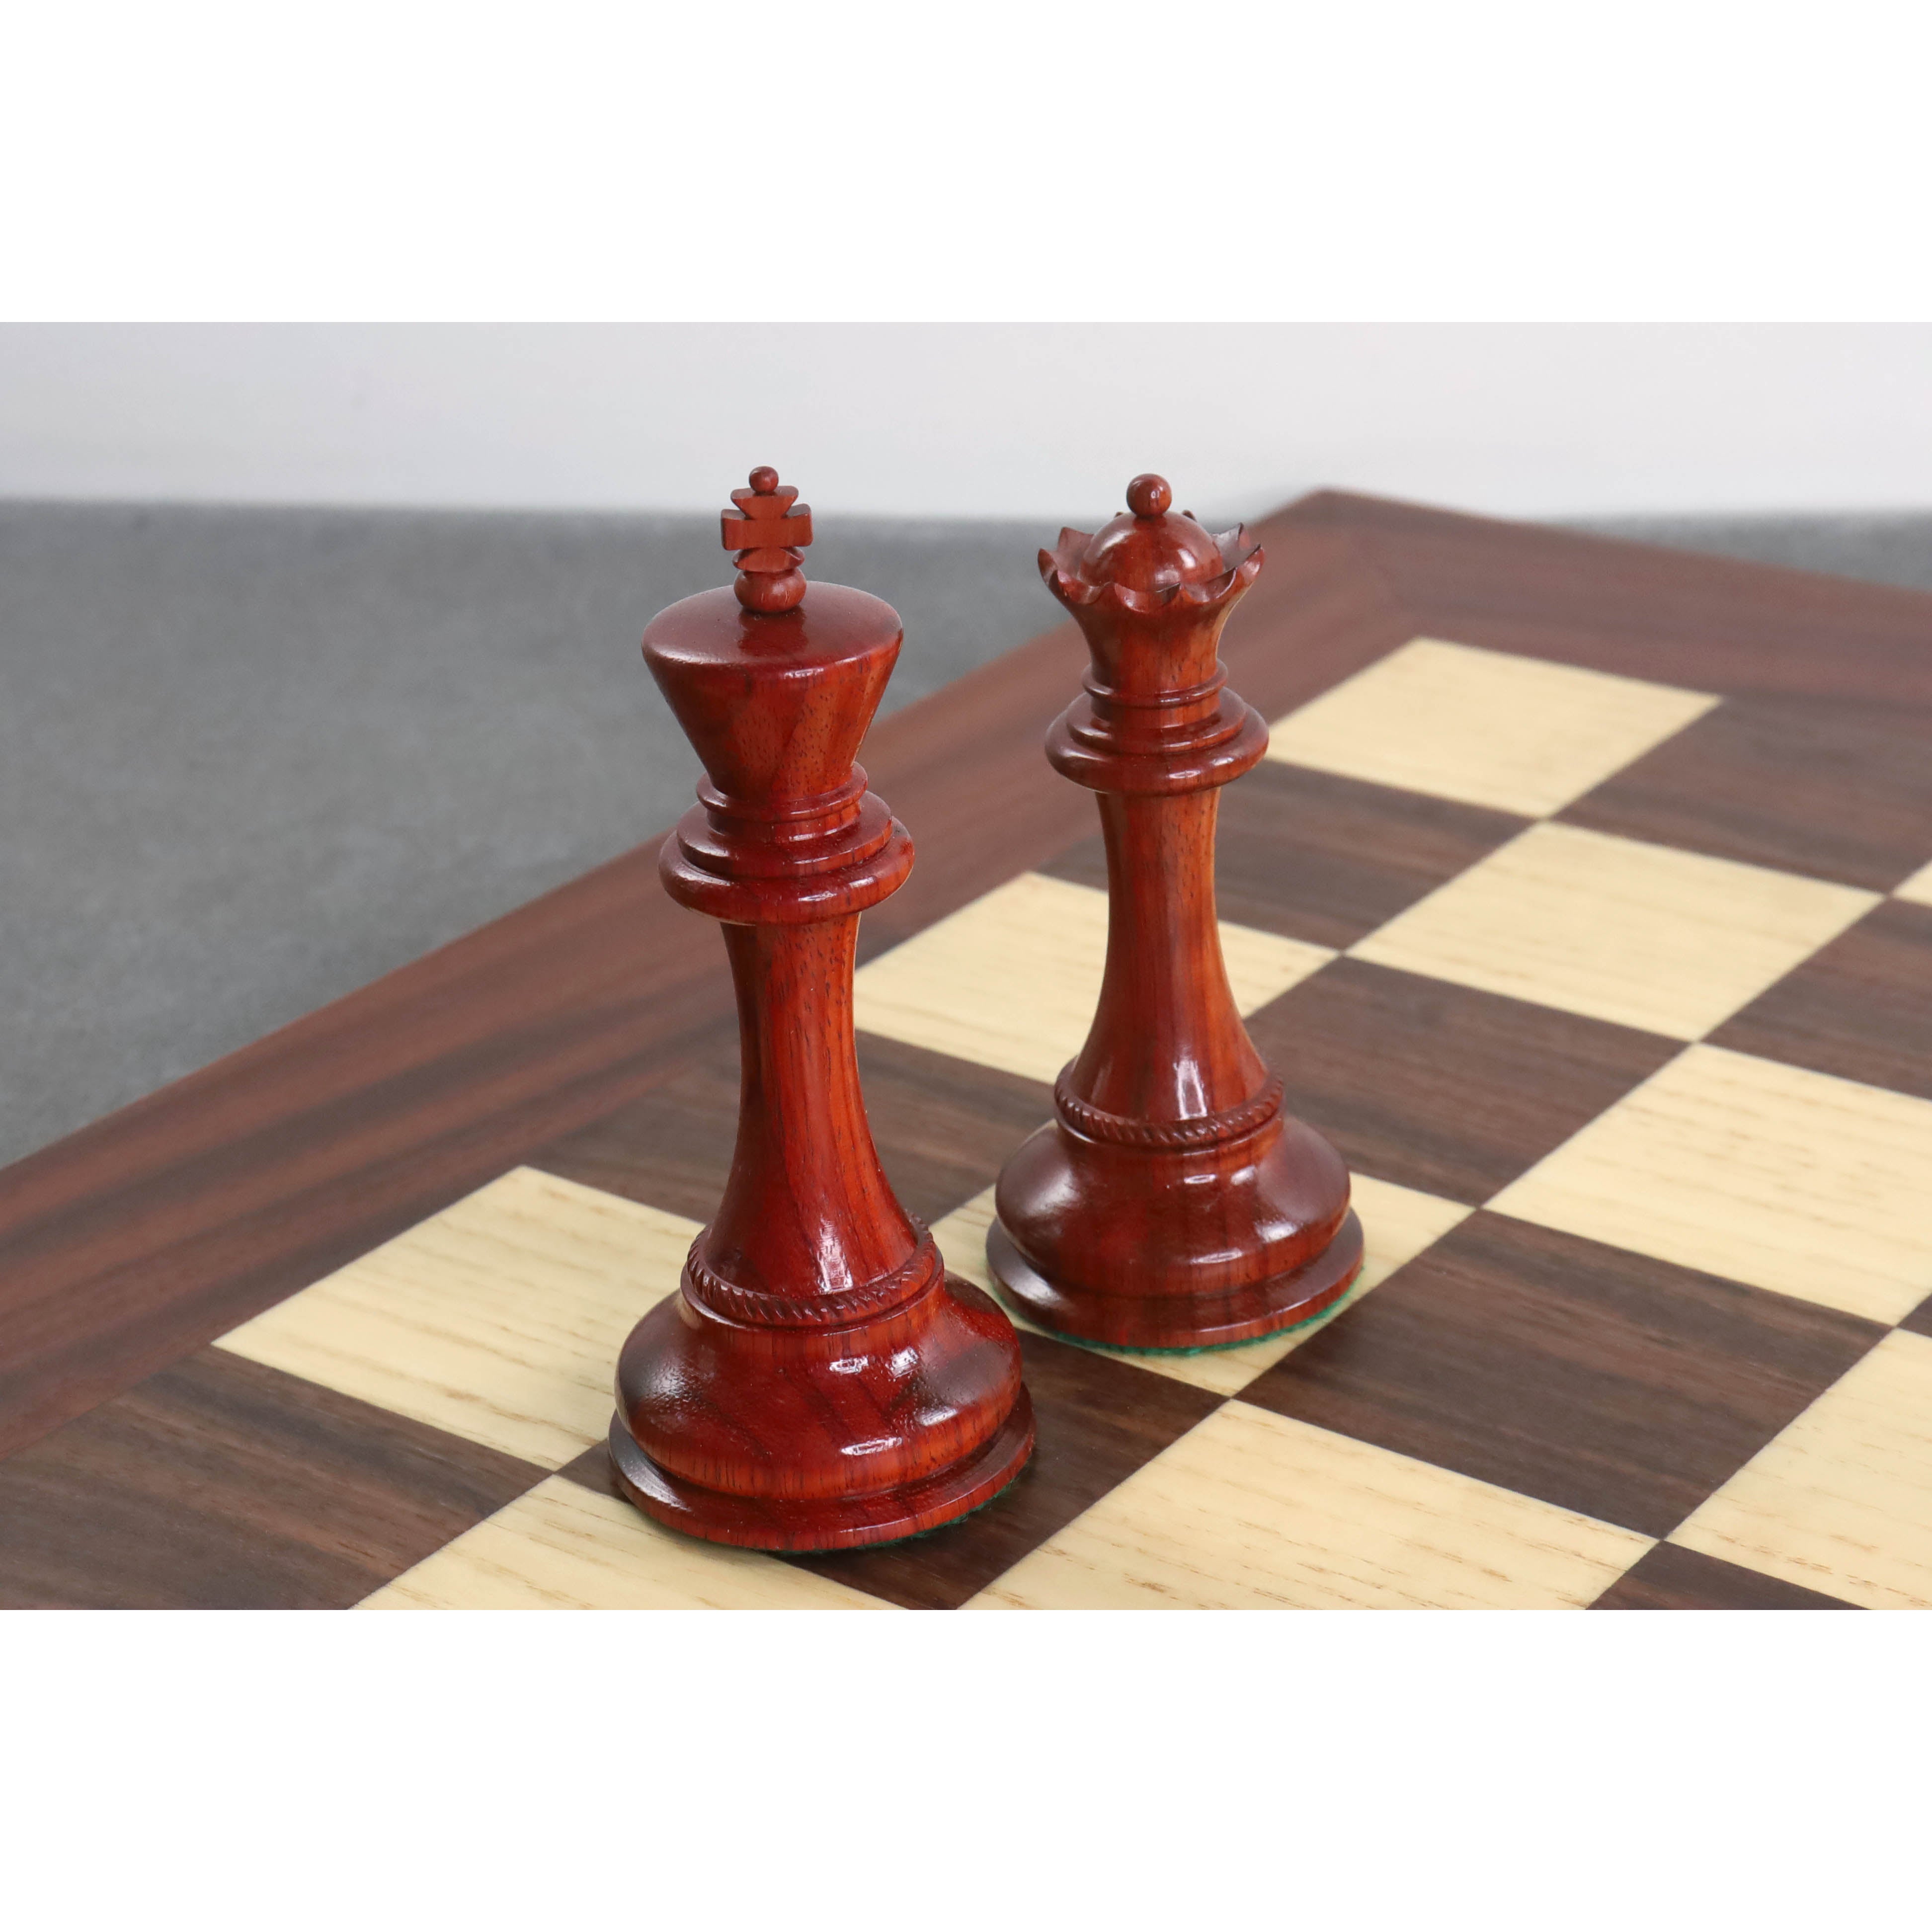 4.5" Imperator Luxury Staunton Chess Pieces Only Set-Bud Rosewood - Triple Weight